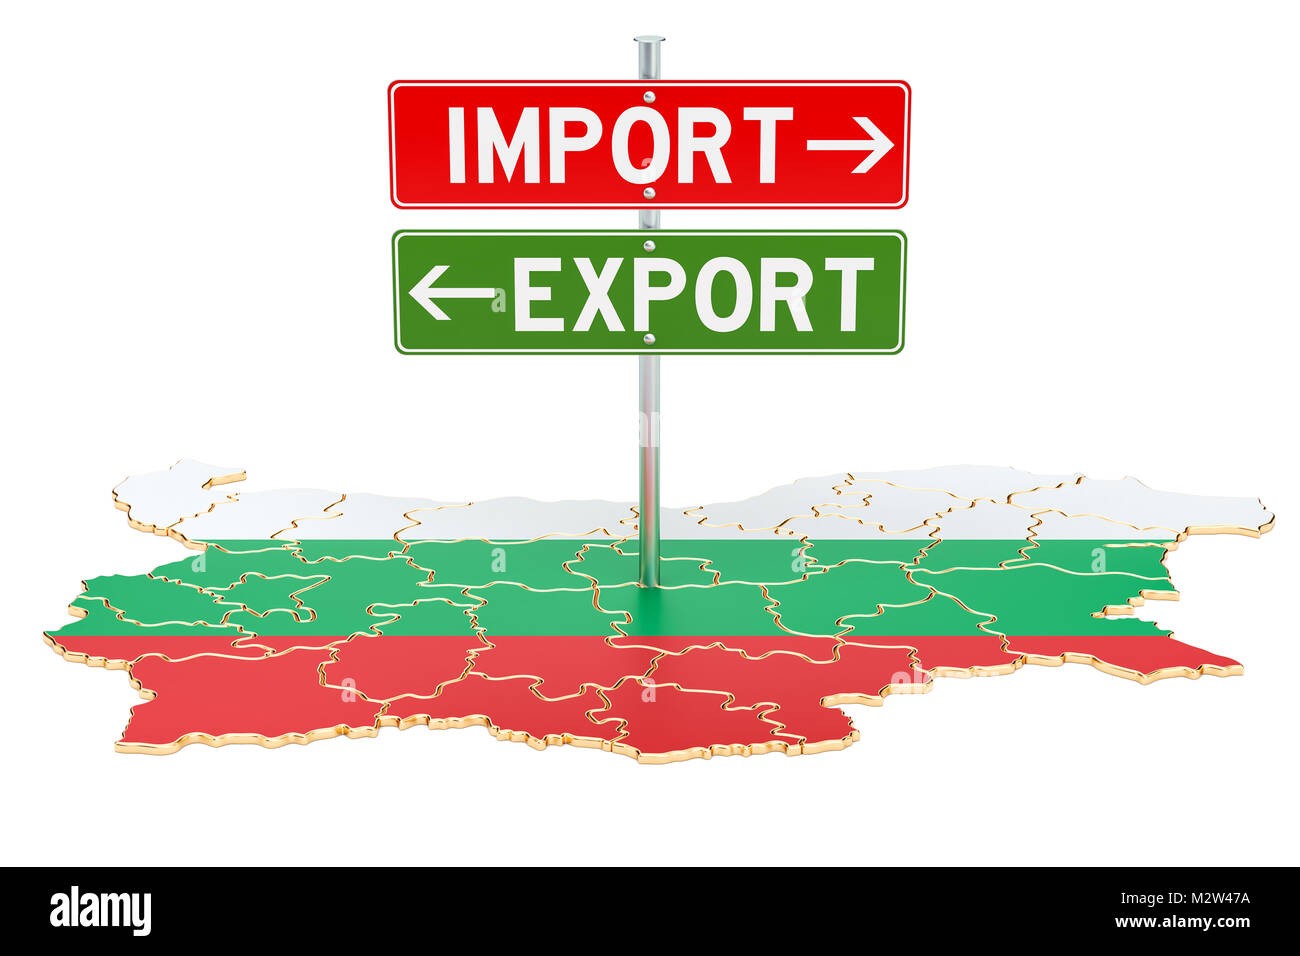 Half Of Bulgaria’s Exports Are For 6 Countries